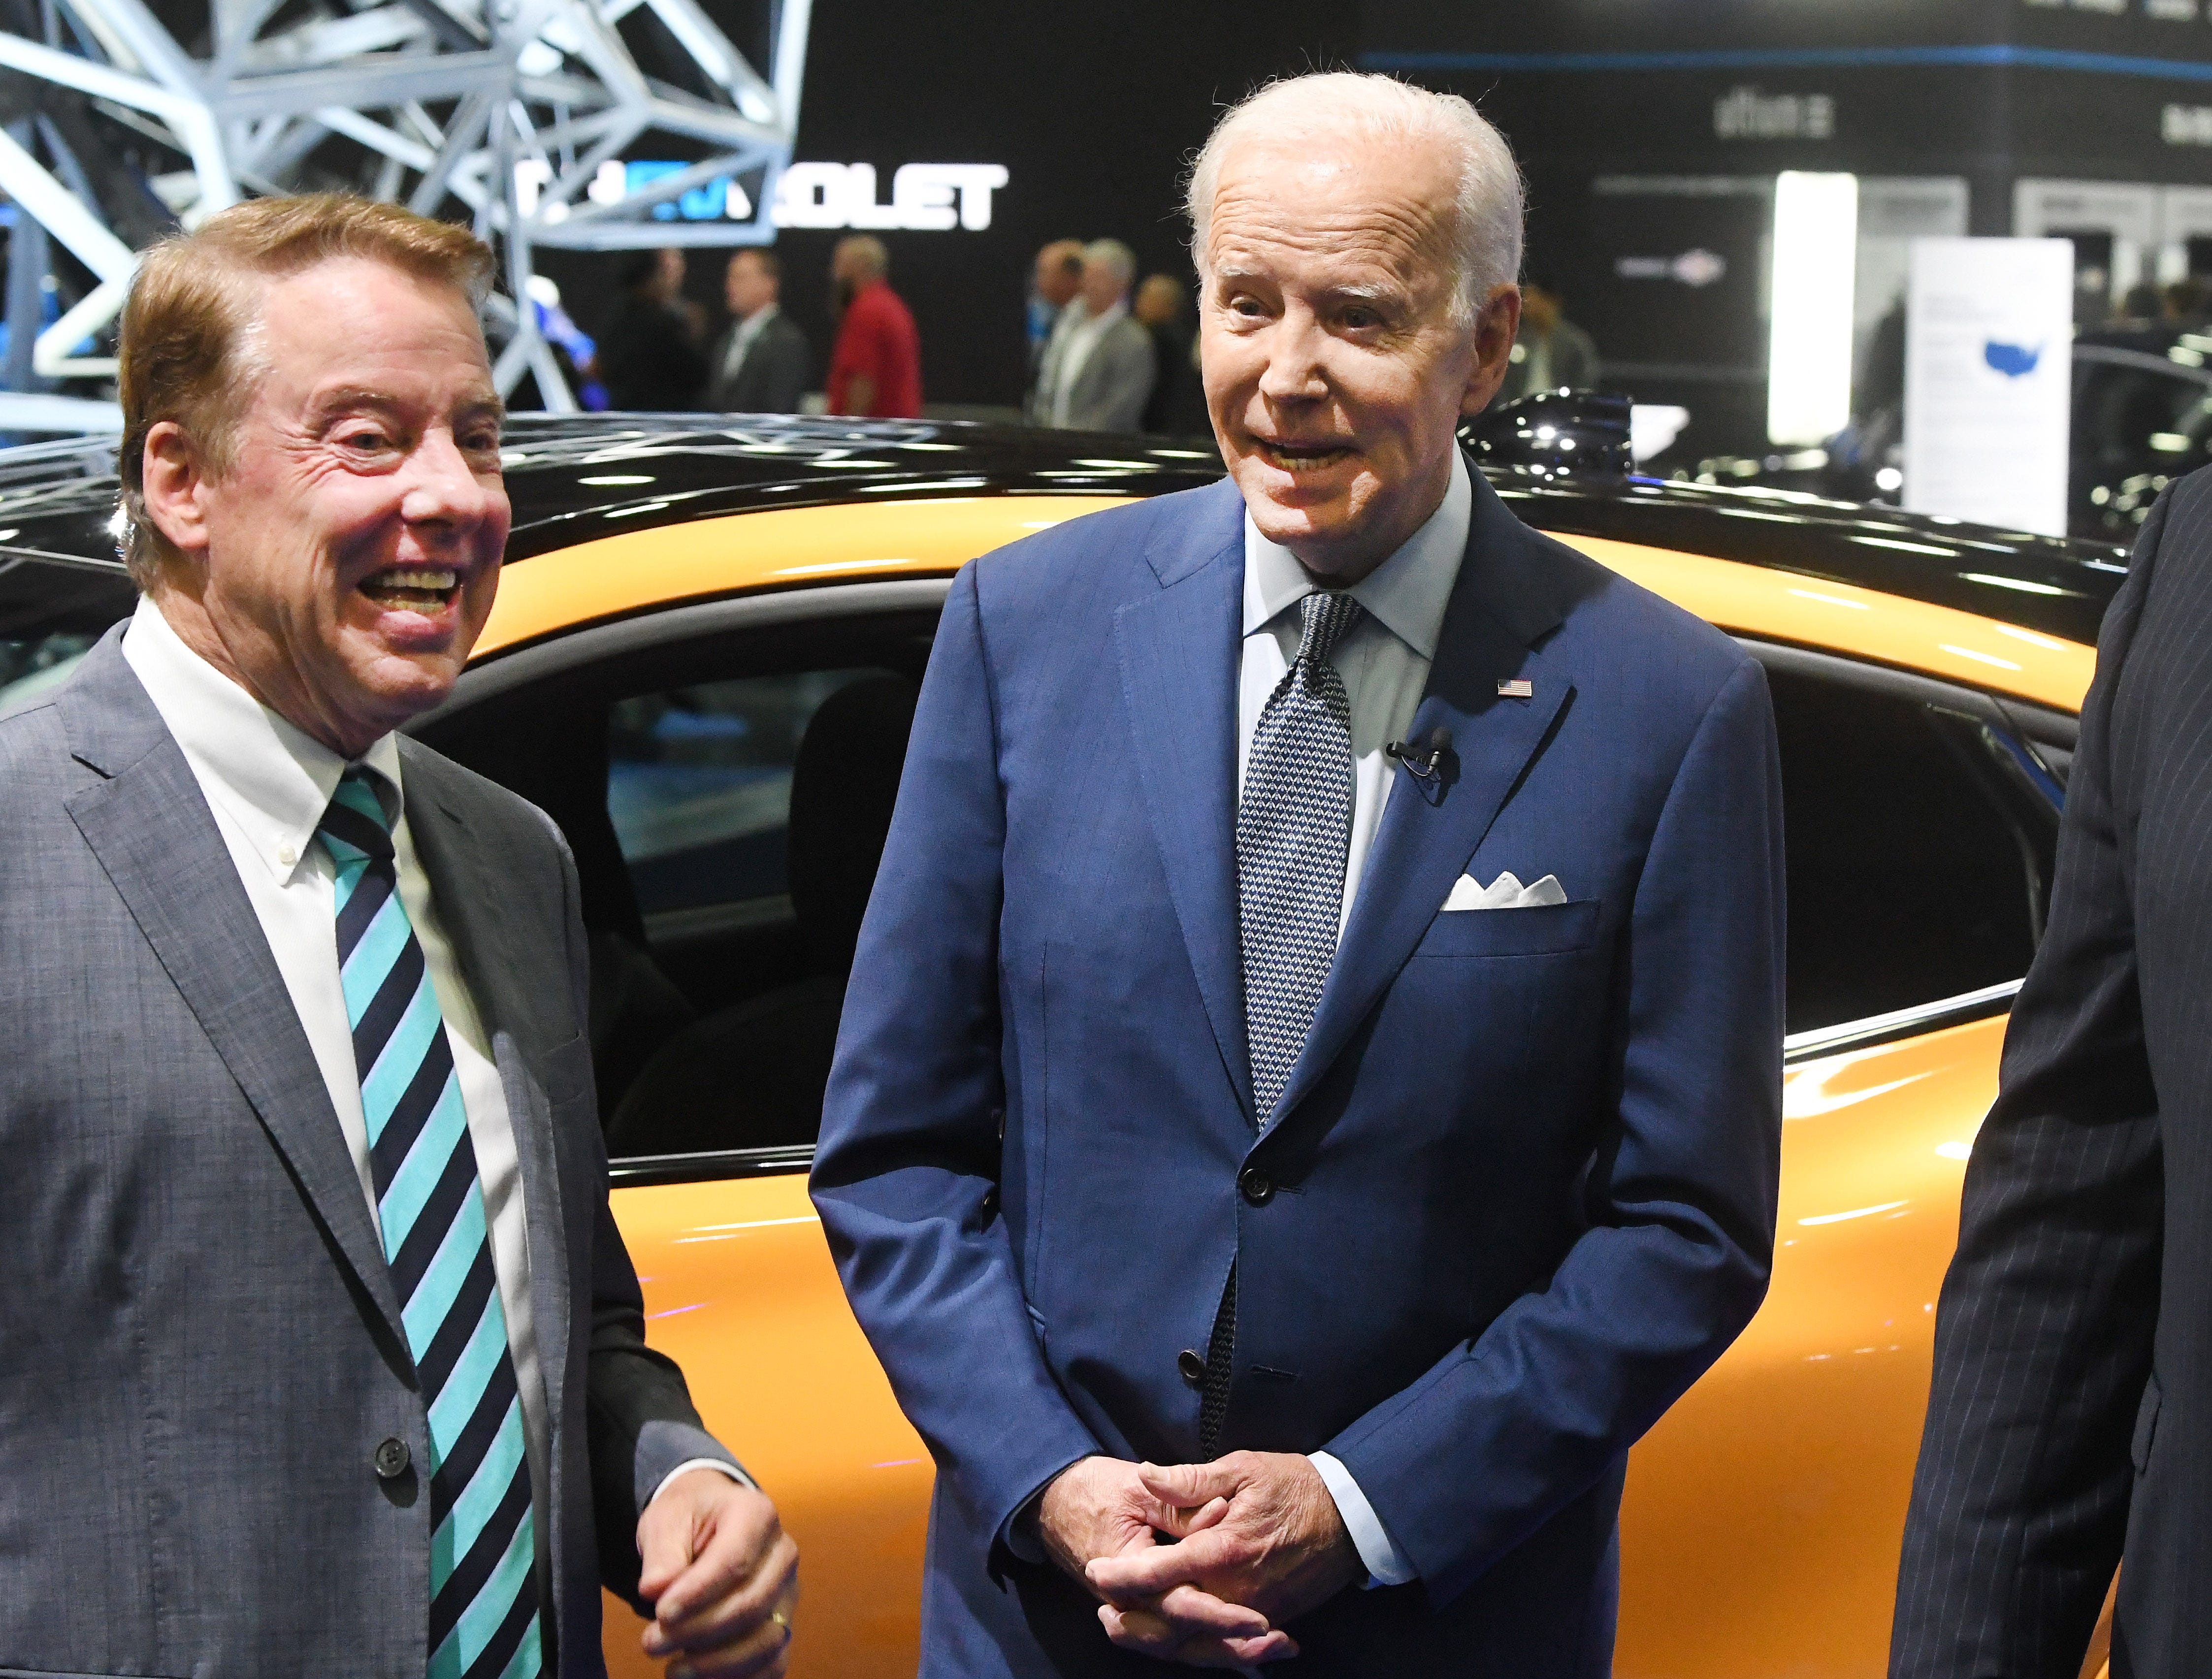 Executive Chair of Ford Motor Company William Clay Ford Jr. shows President Joe Biden the Ford display during a tour of the 2022 North American International Auto Show in Detroit, Michigan on September 14, 2022.